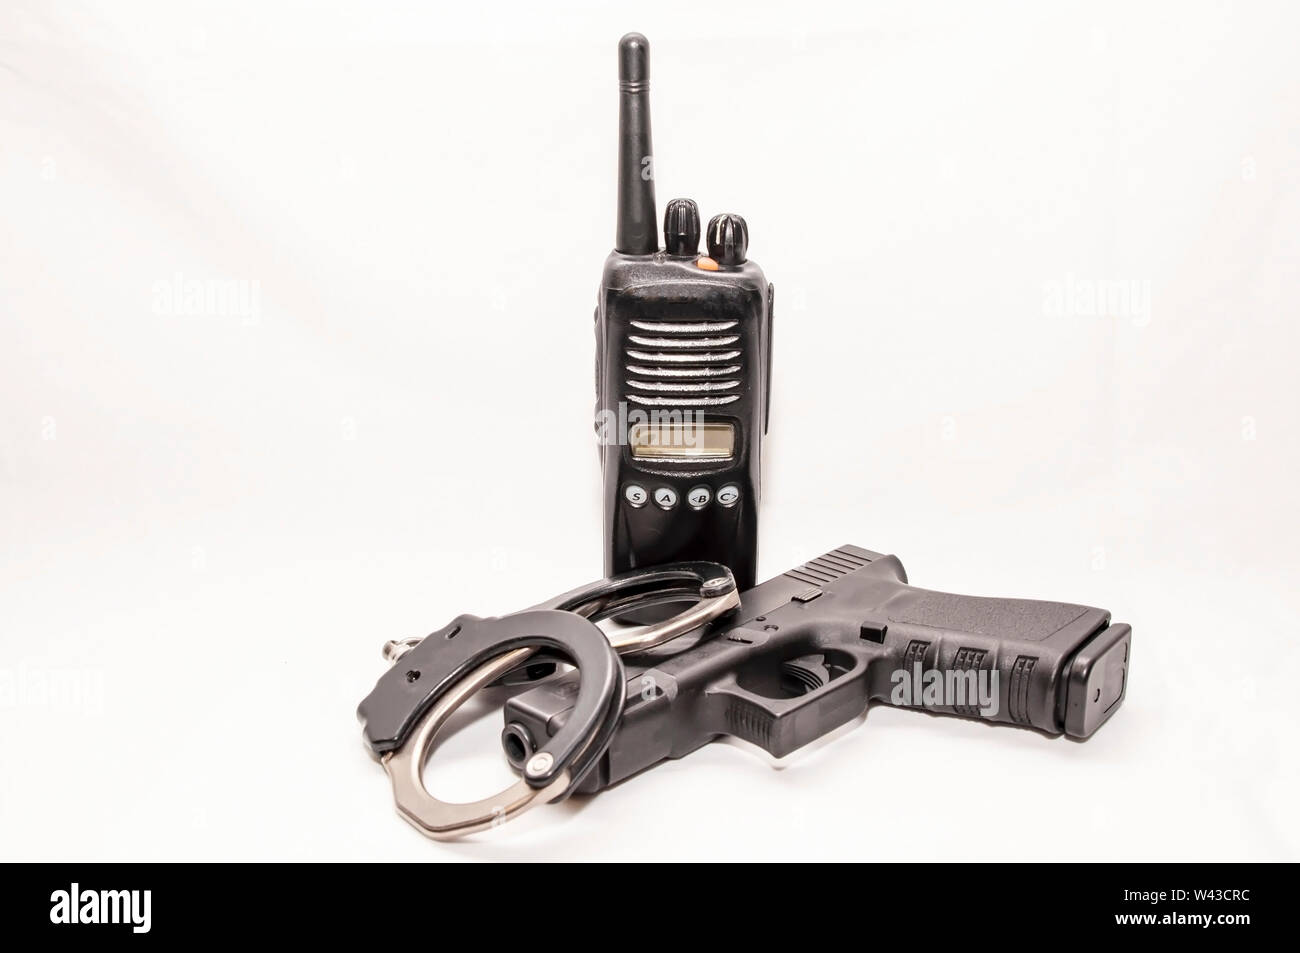 A set of black and silver handcuffs with a black 9mm pistol in front of a police radio with a white background Stock Photo